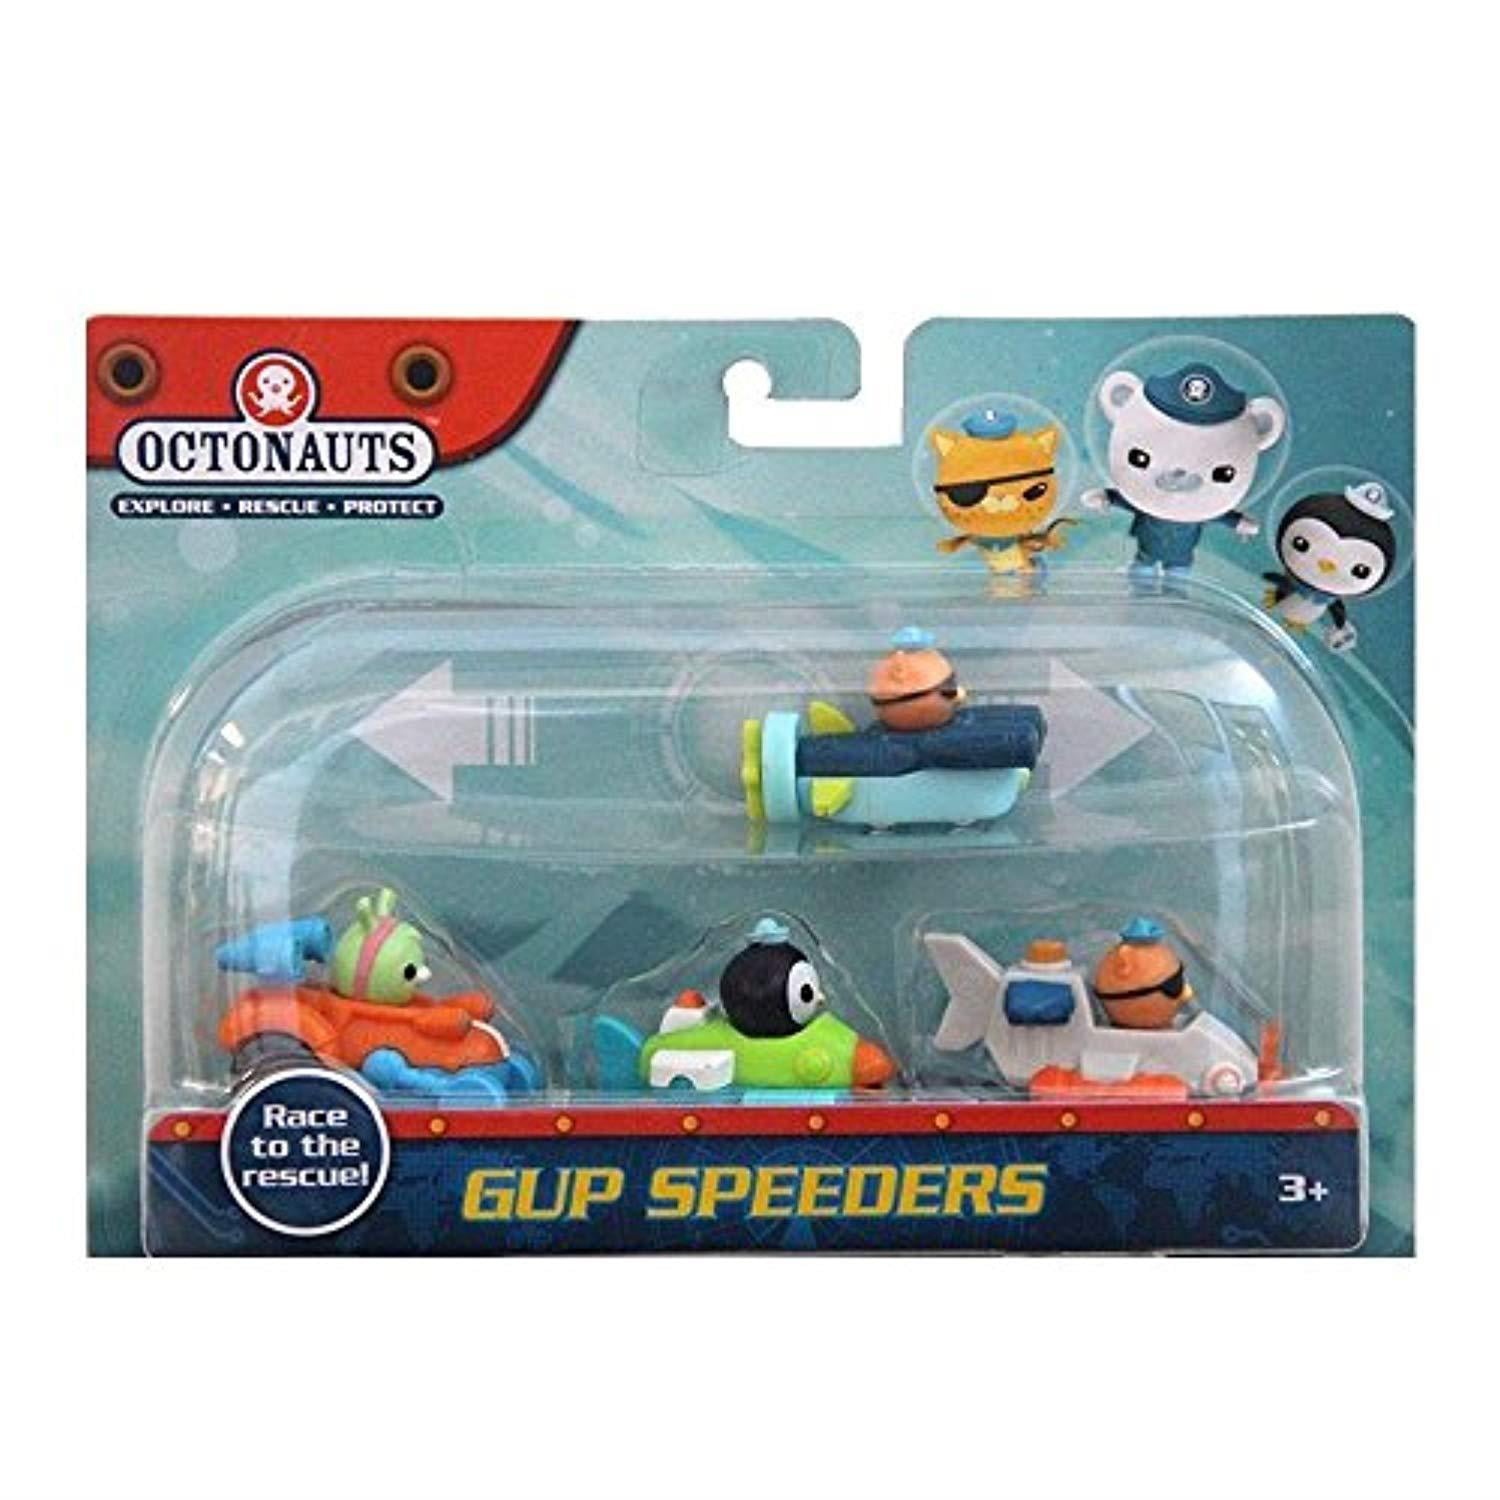 Octonauts Launch and Rescue Gup X Toy Vehicle KIDS Sounds Pretend Playset NEW